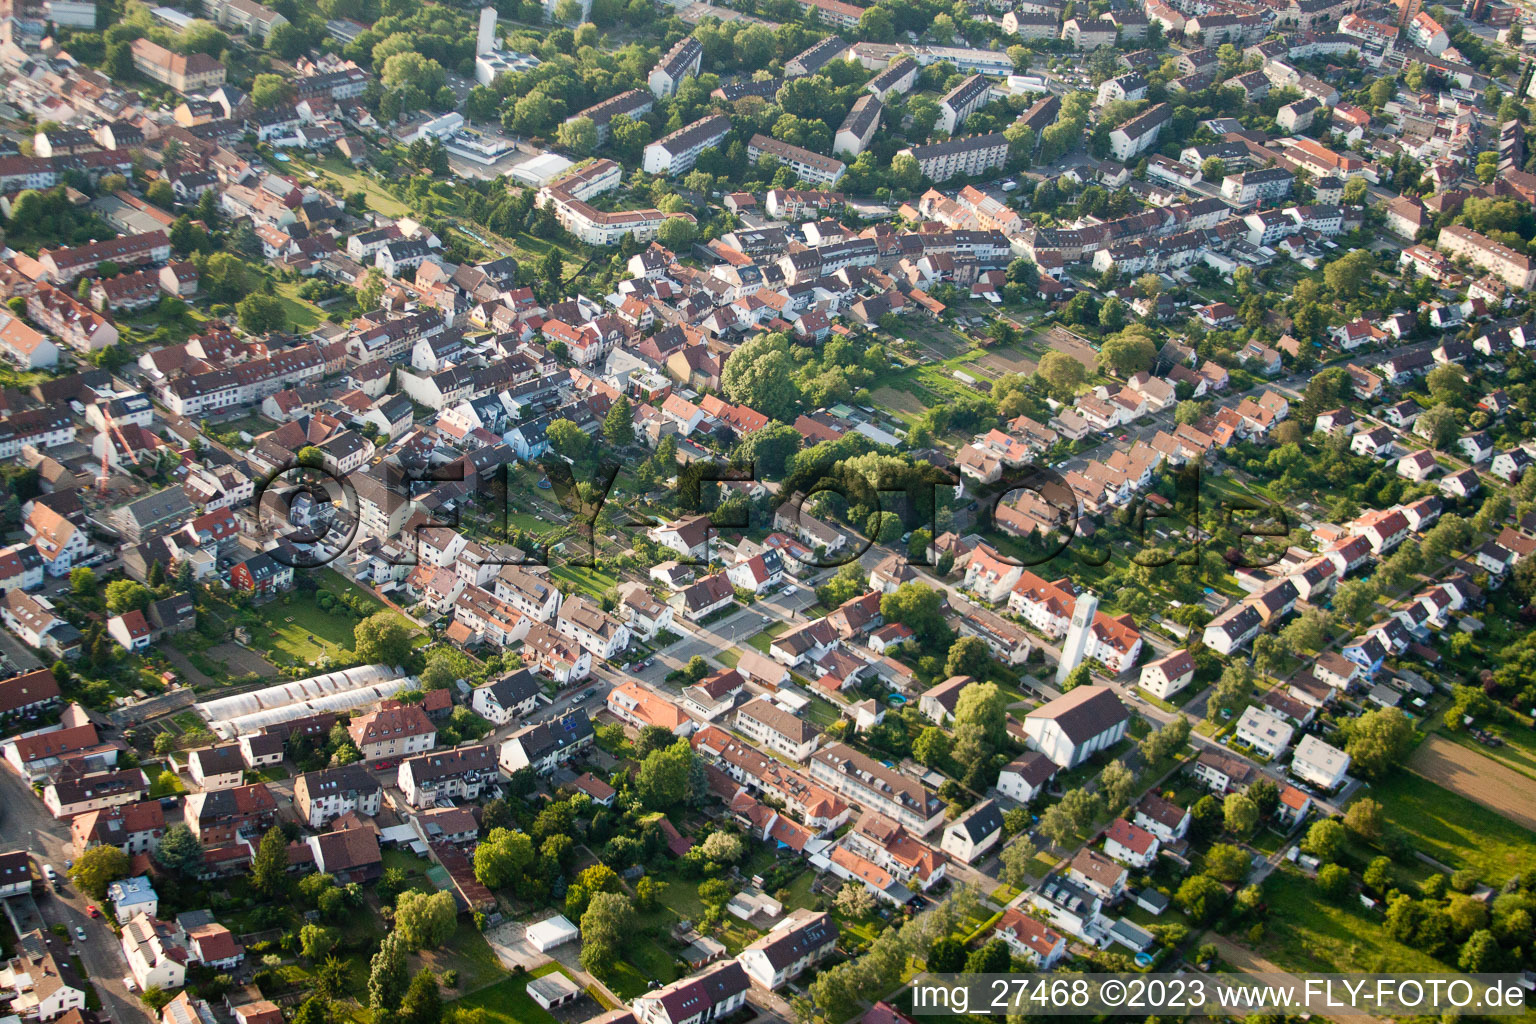 Aerial photograpy of Ouch in the district Durlach in Karlsruhe in the state Baden-Wuerttemberg, Germany